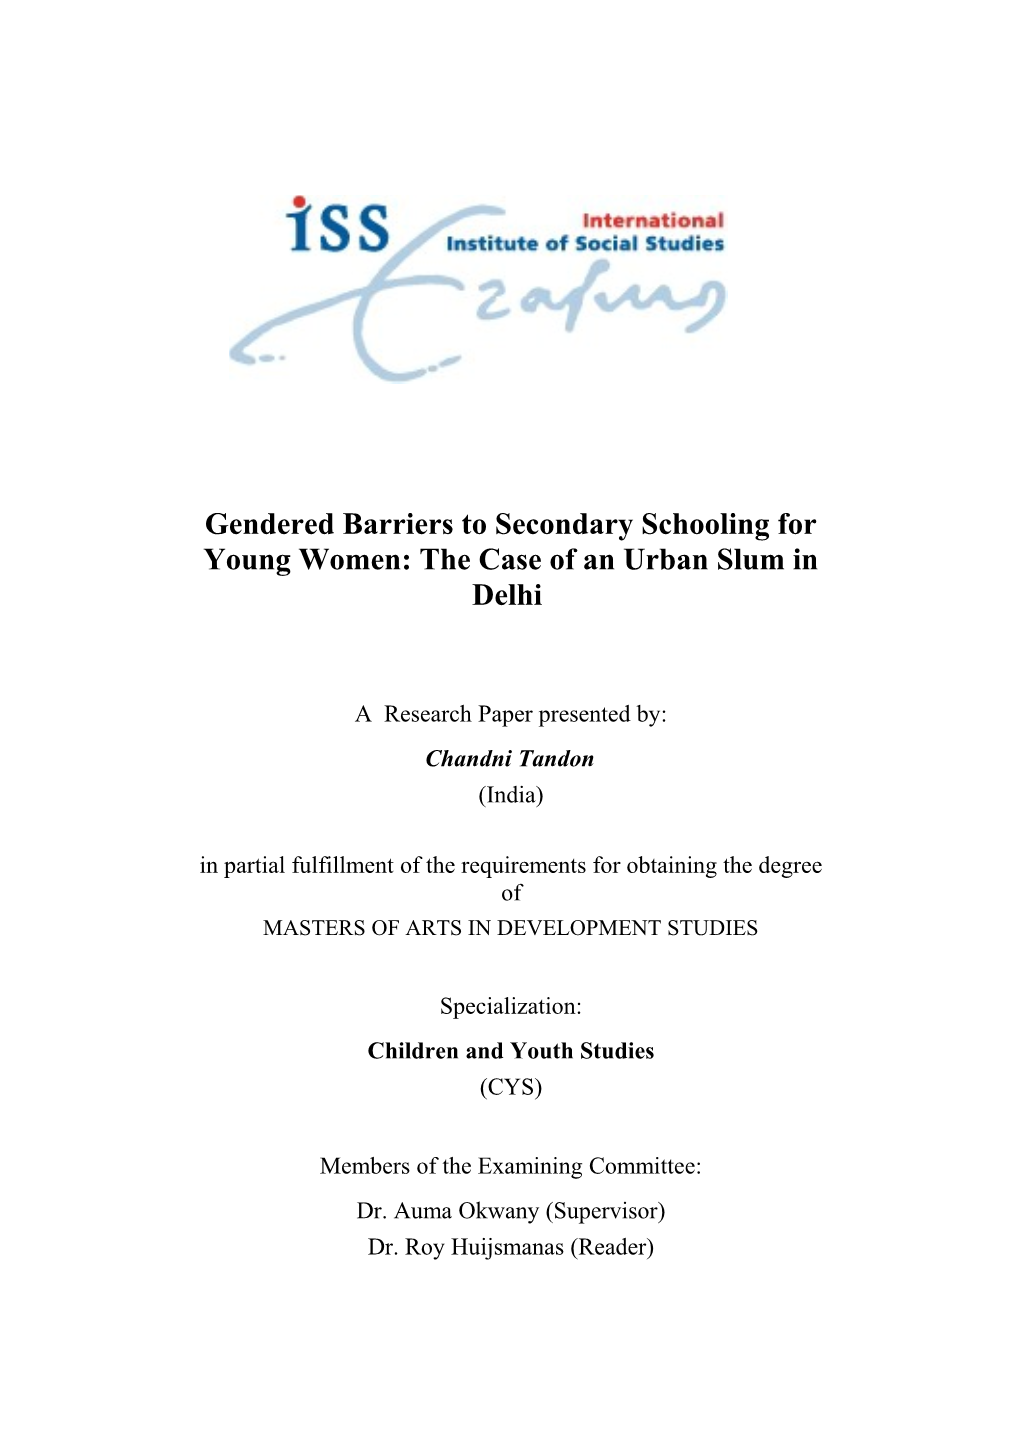 Gendered Barriers to Secondary Schooling for Young Women: the Case of an Urban Slum in Delhi